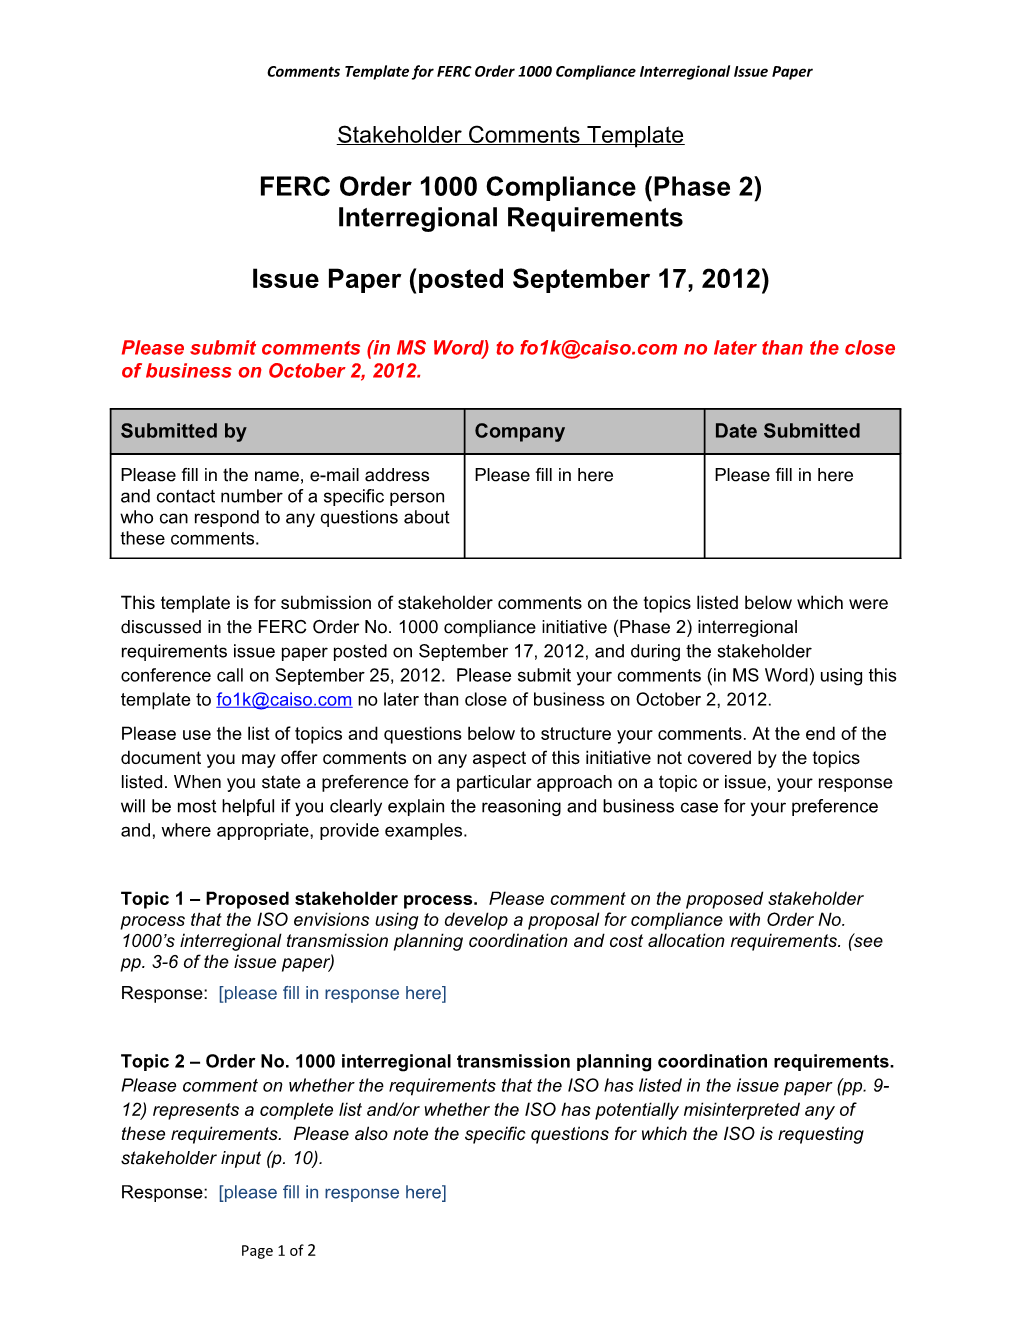 Comments Template for FERC Order 1000 Compliance Interregional Issue Paper